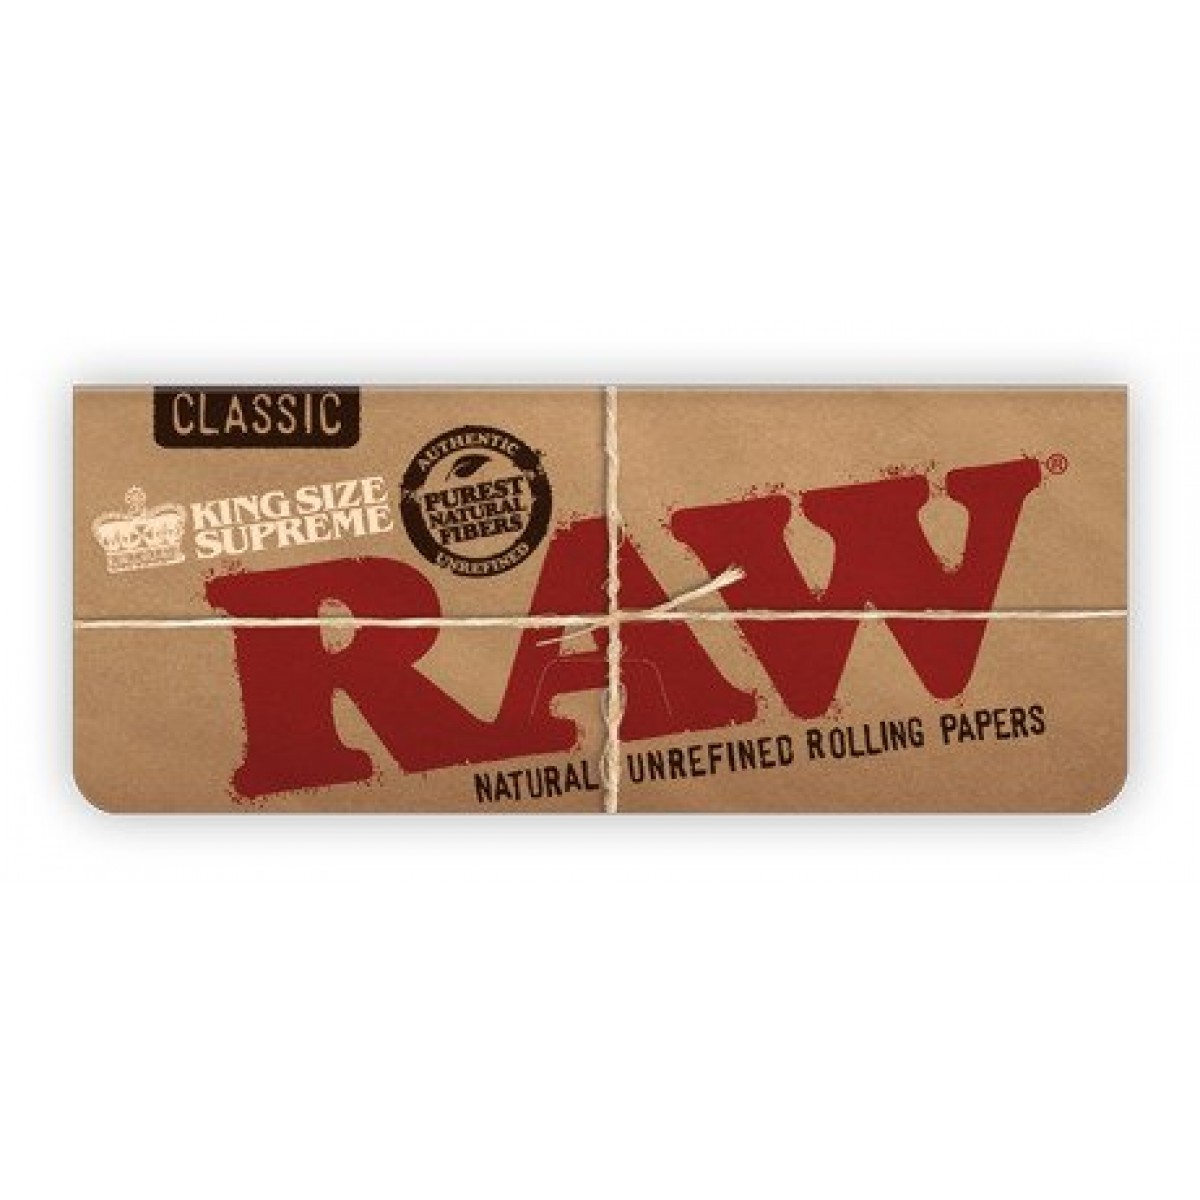 RAW Classic Creaseless Kingsize Supreme Rolling Papers - Box